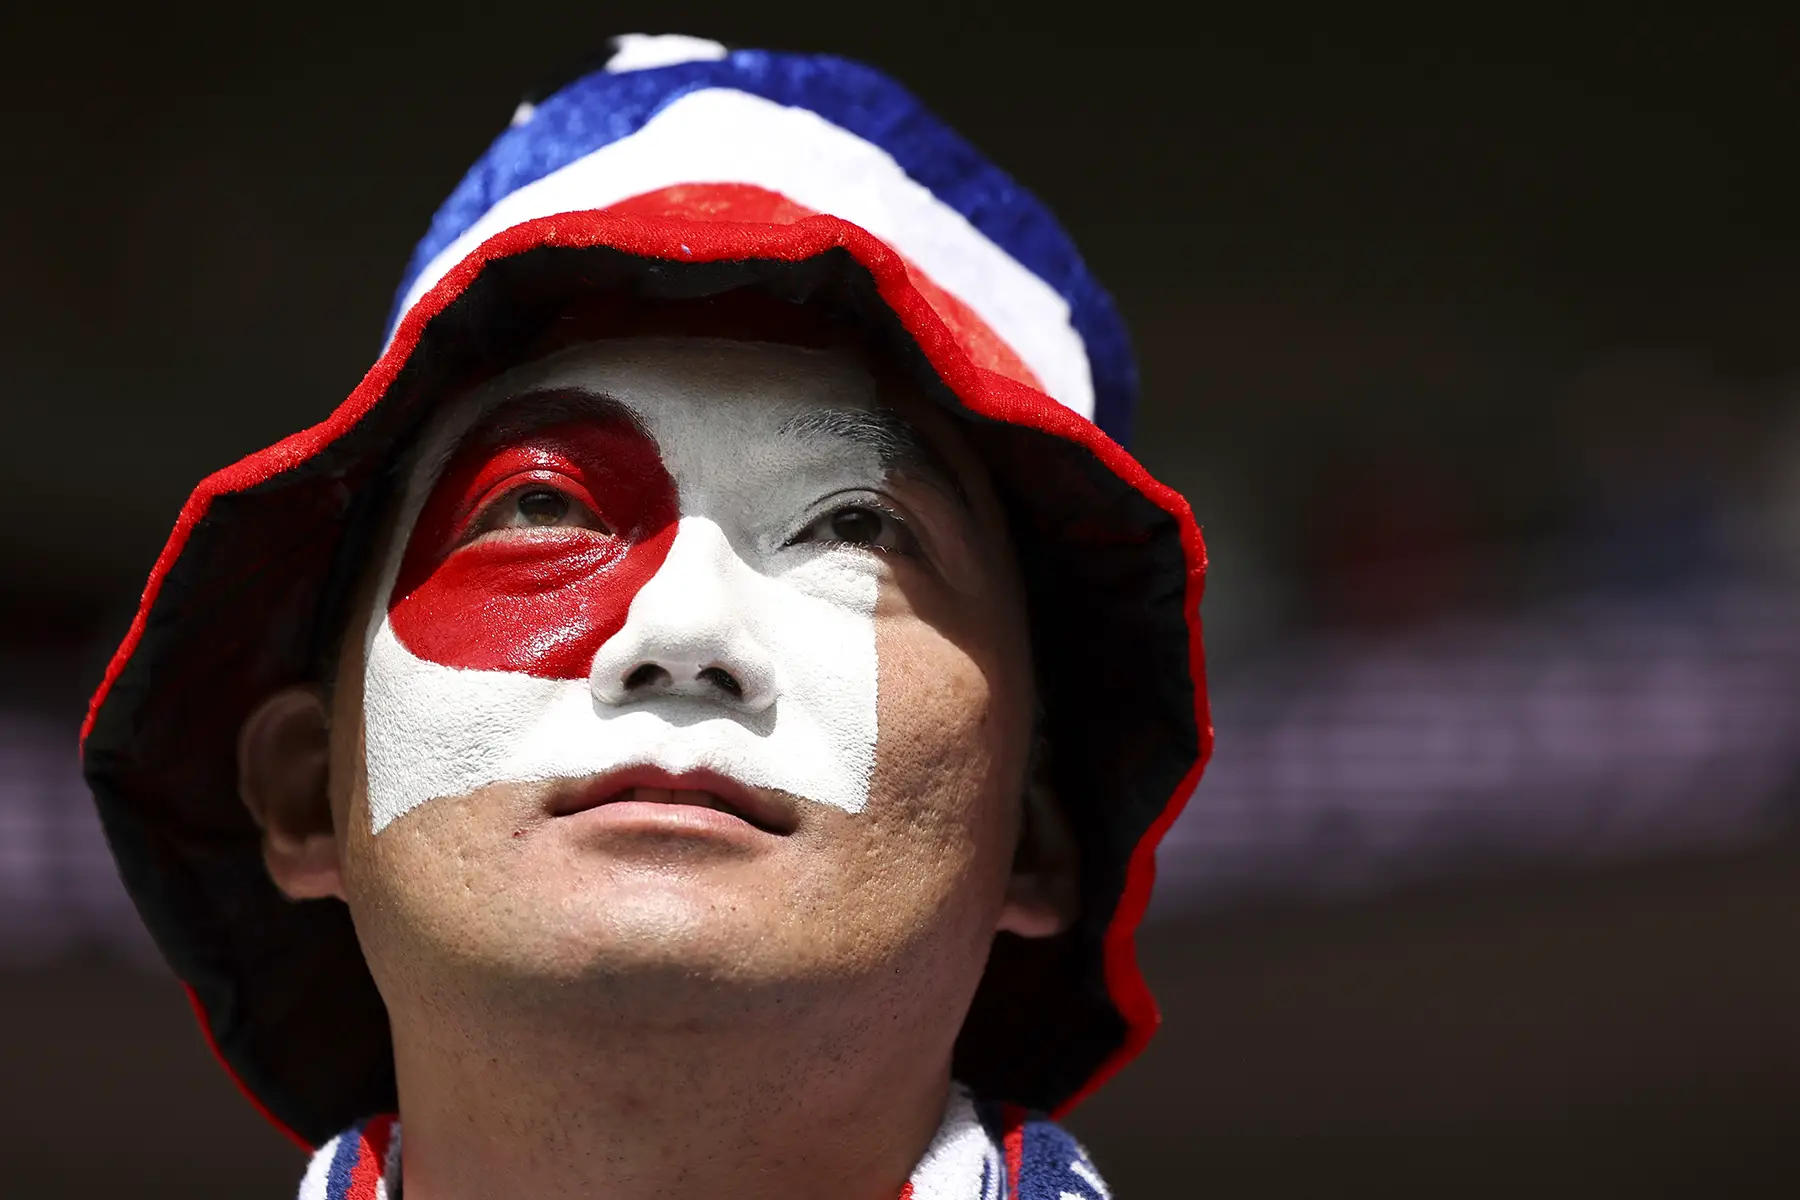 Man wearing a red, blue and red hat with a Japanese flag painted on his face